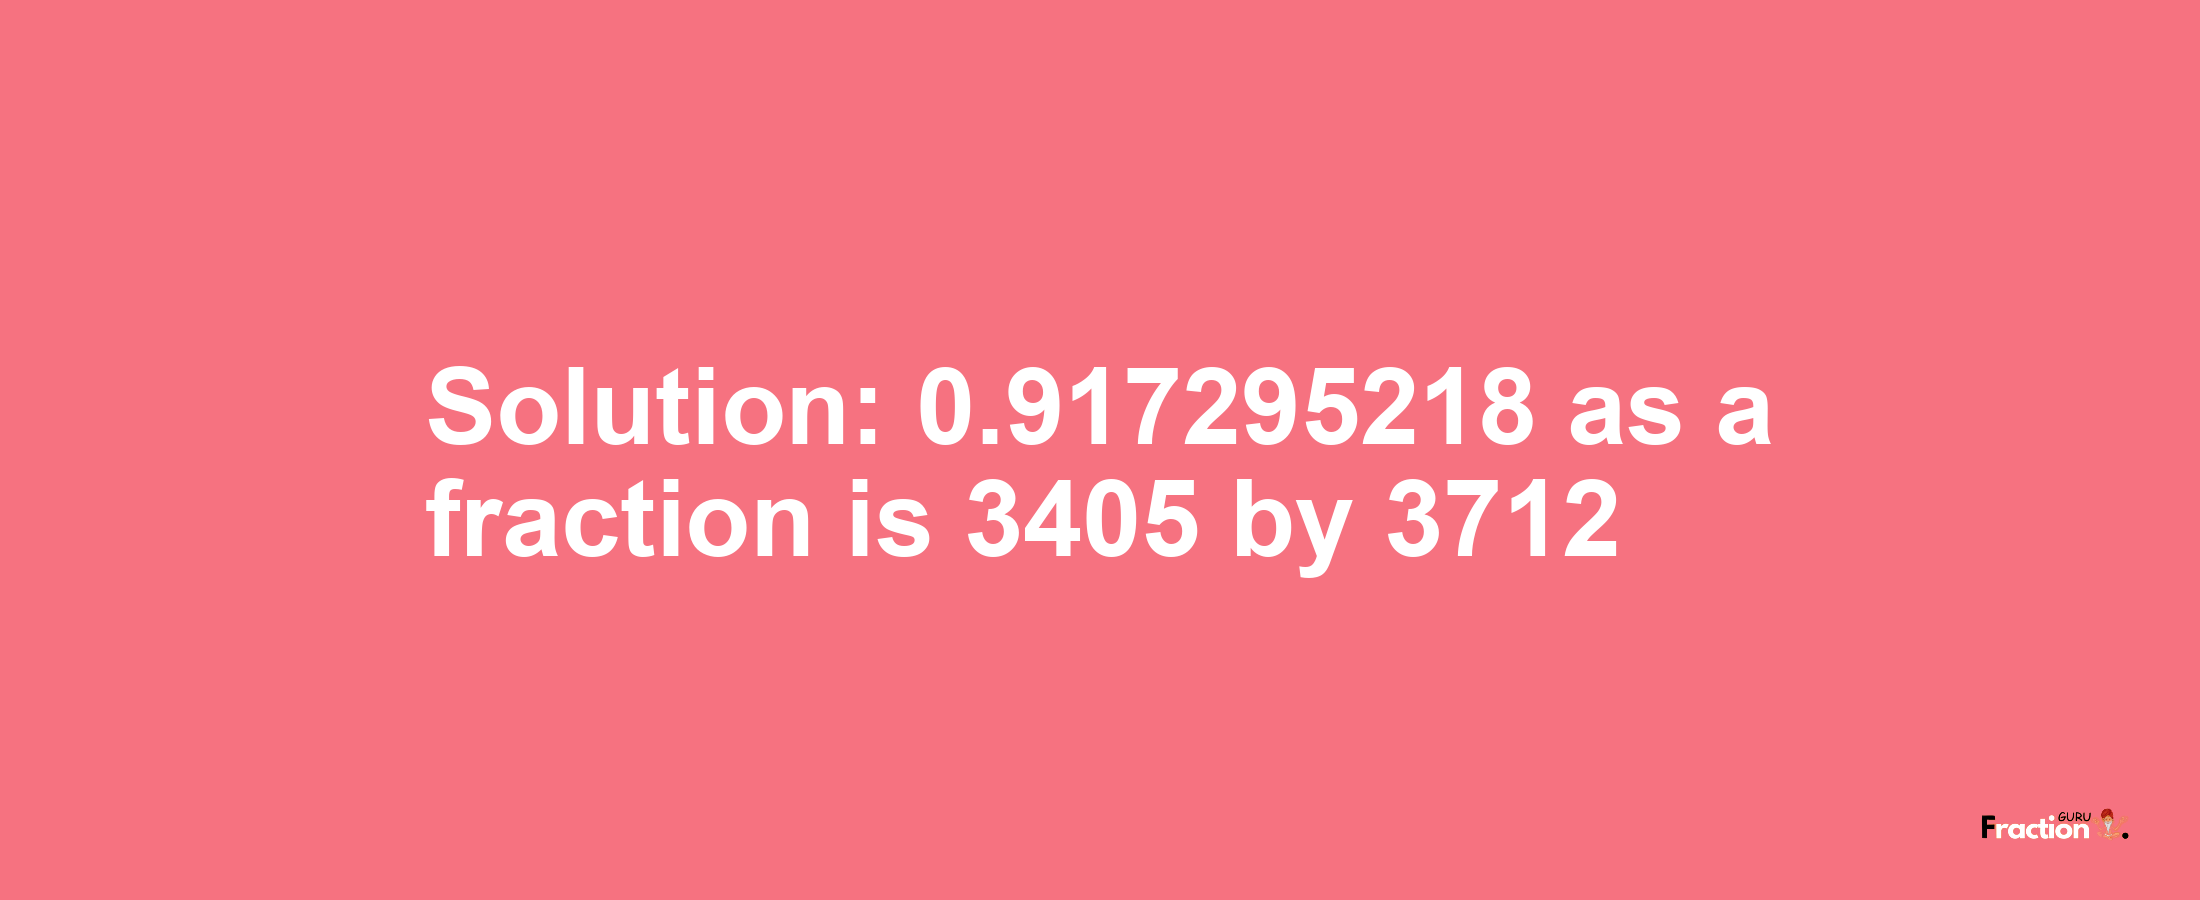 Solution:0.917295218 as a fraction is 3405/3712